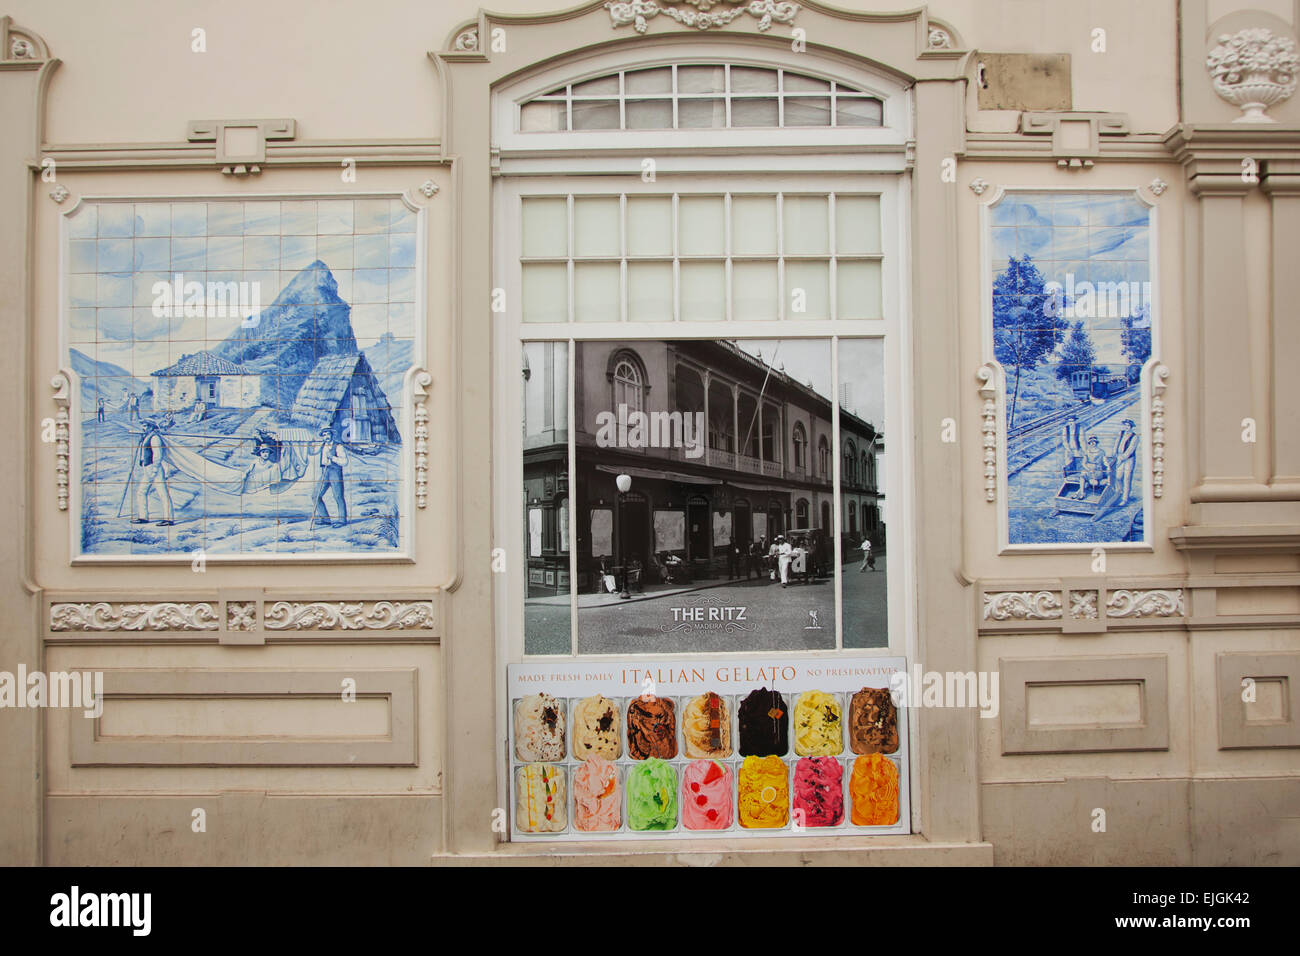 Wall tiles and a old photograph on the side wall of the Ritz restaurant in Funchal Madeira Portugal Stock Photo